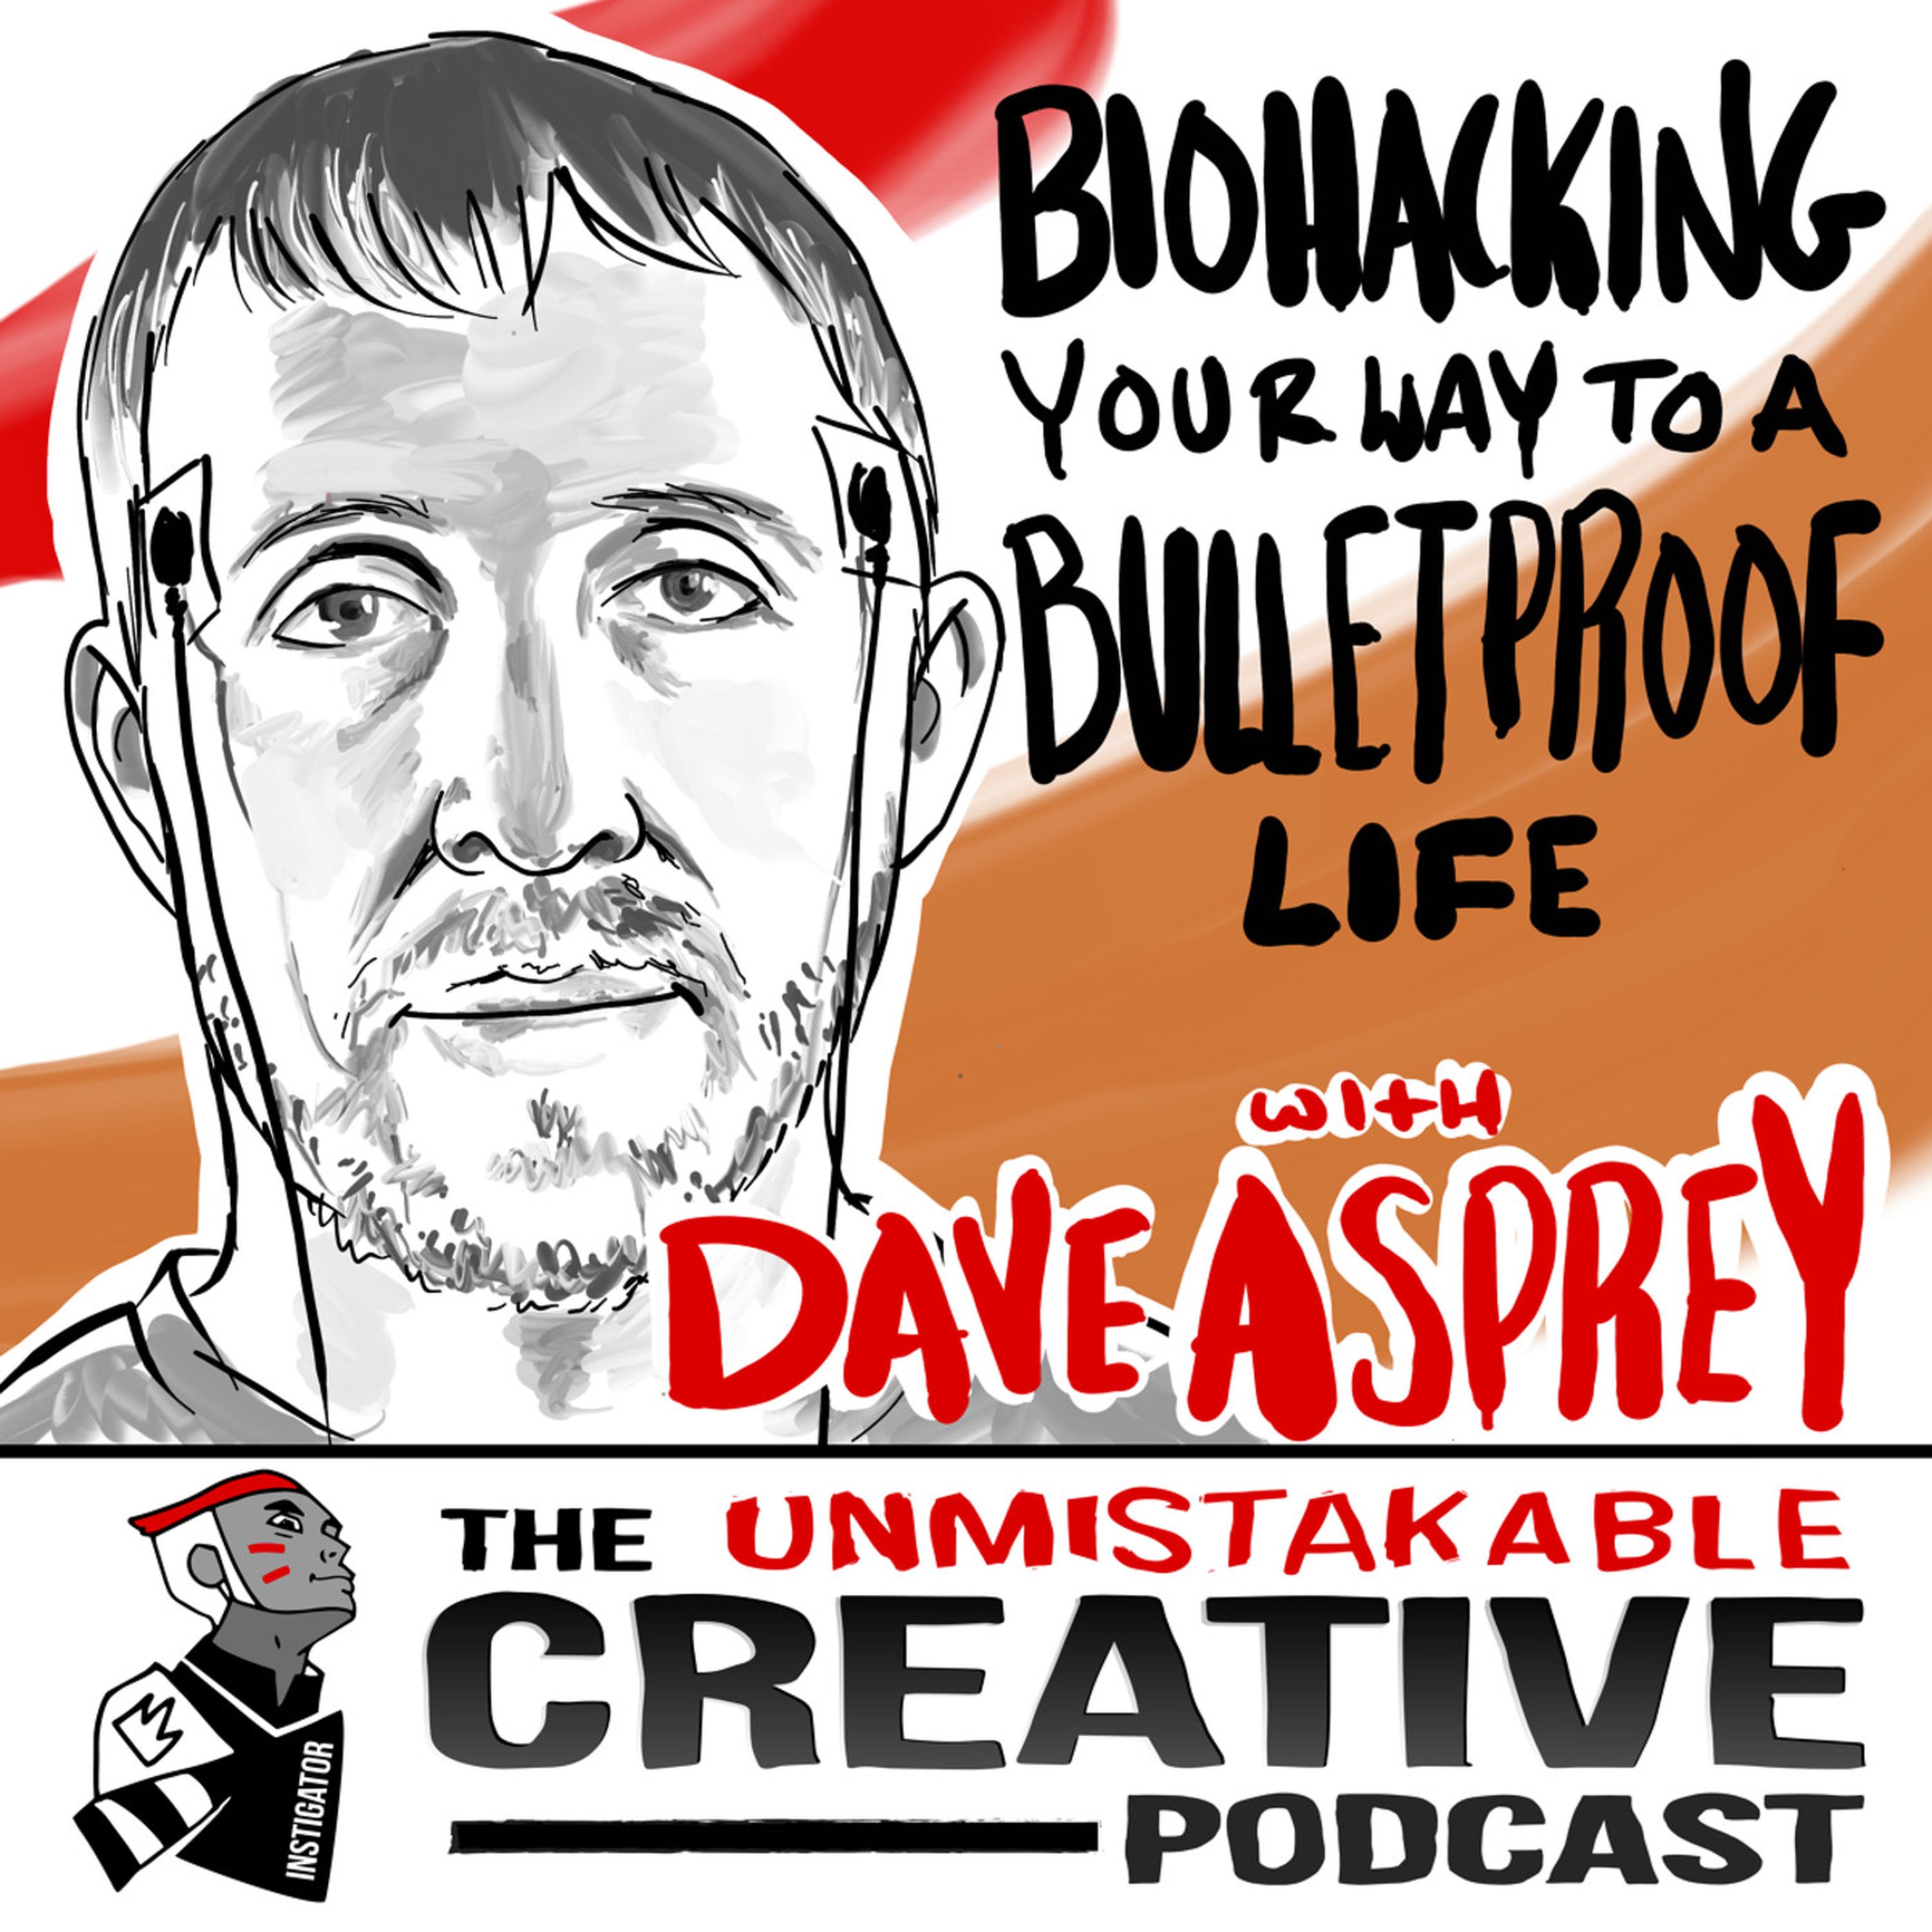 Biohacking Your Way to a Bulletproof Life with Dave Asprey